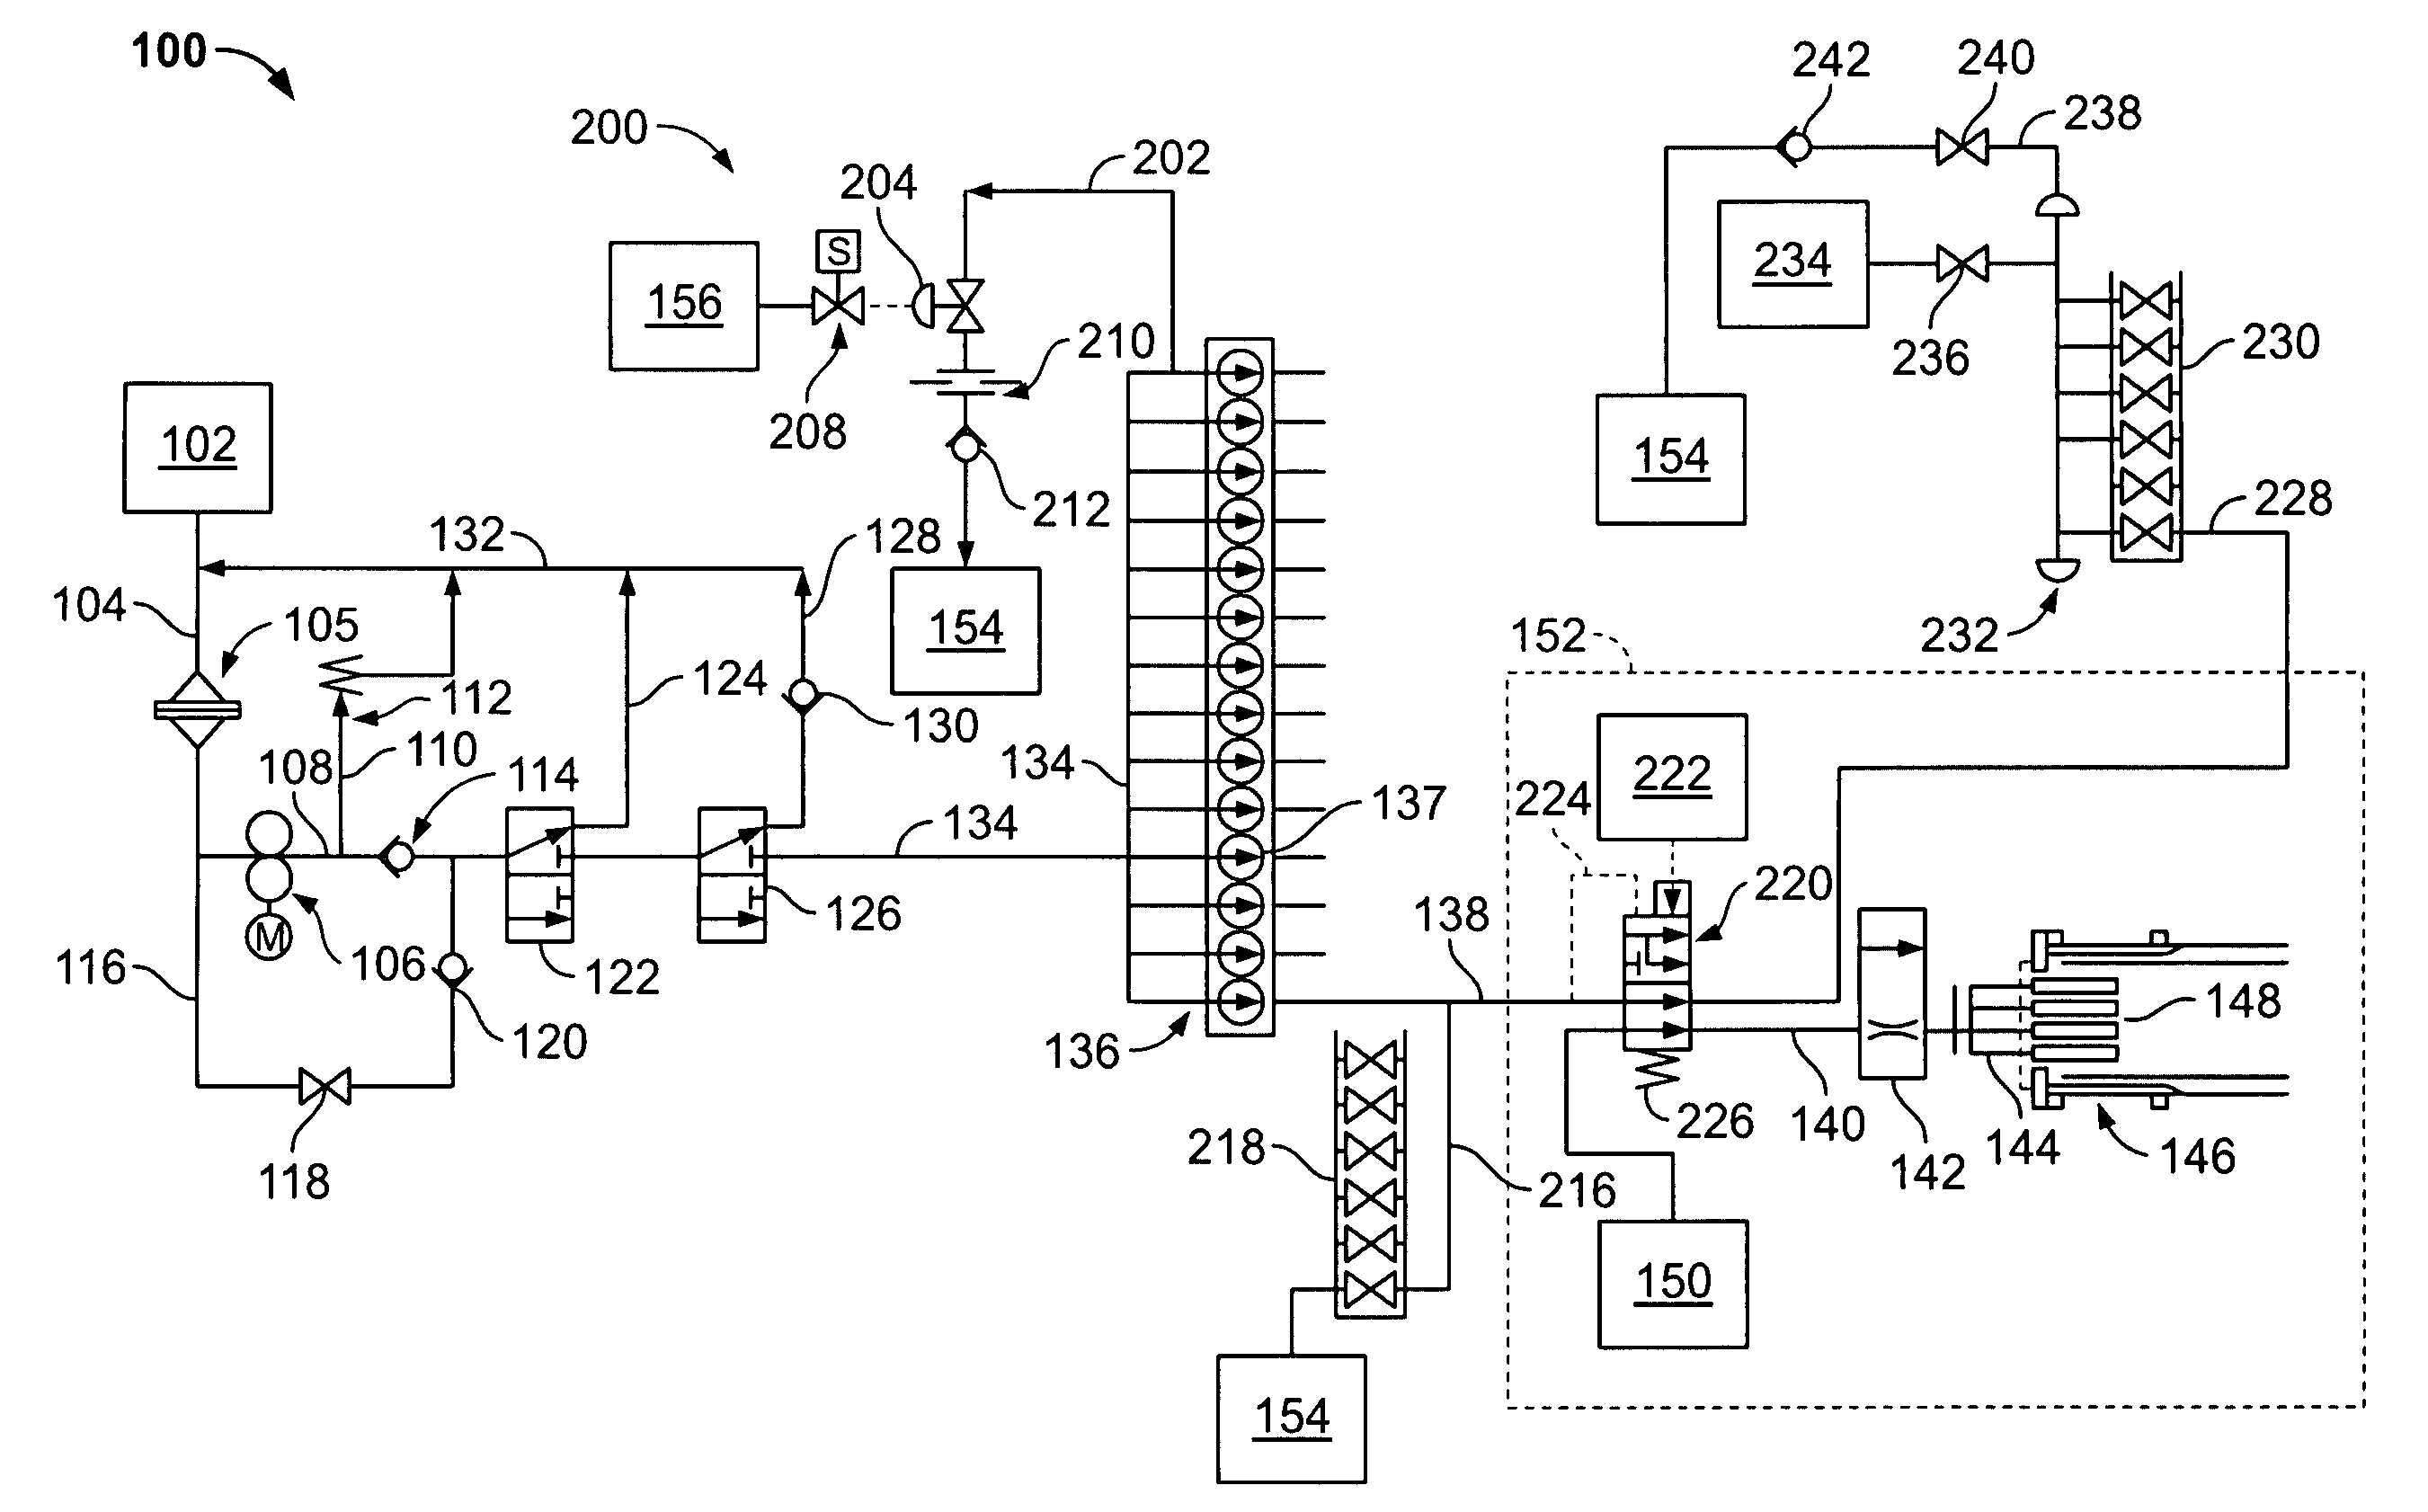 Methods and apparatus for a combustion turbine nitrogen purge system